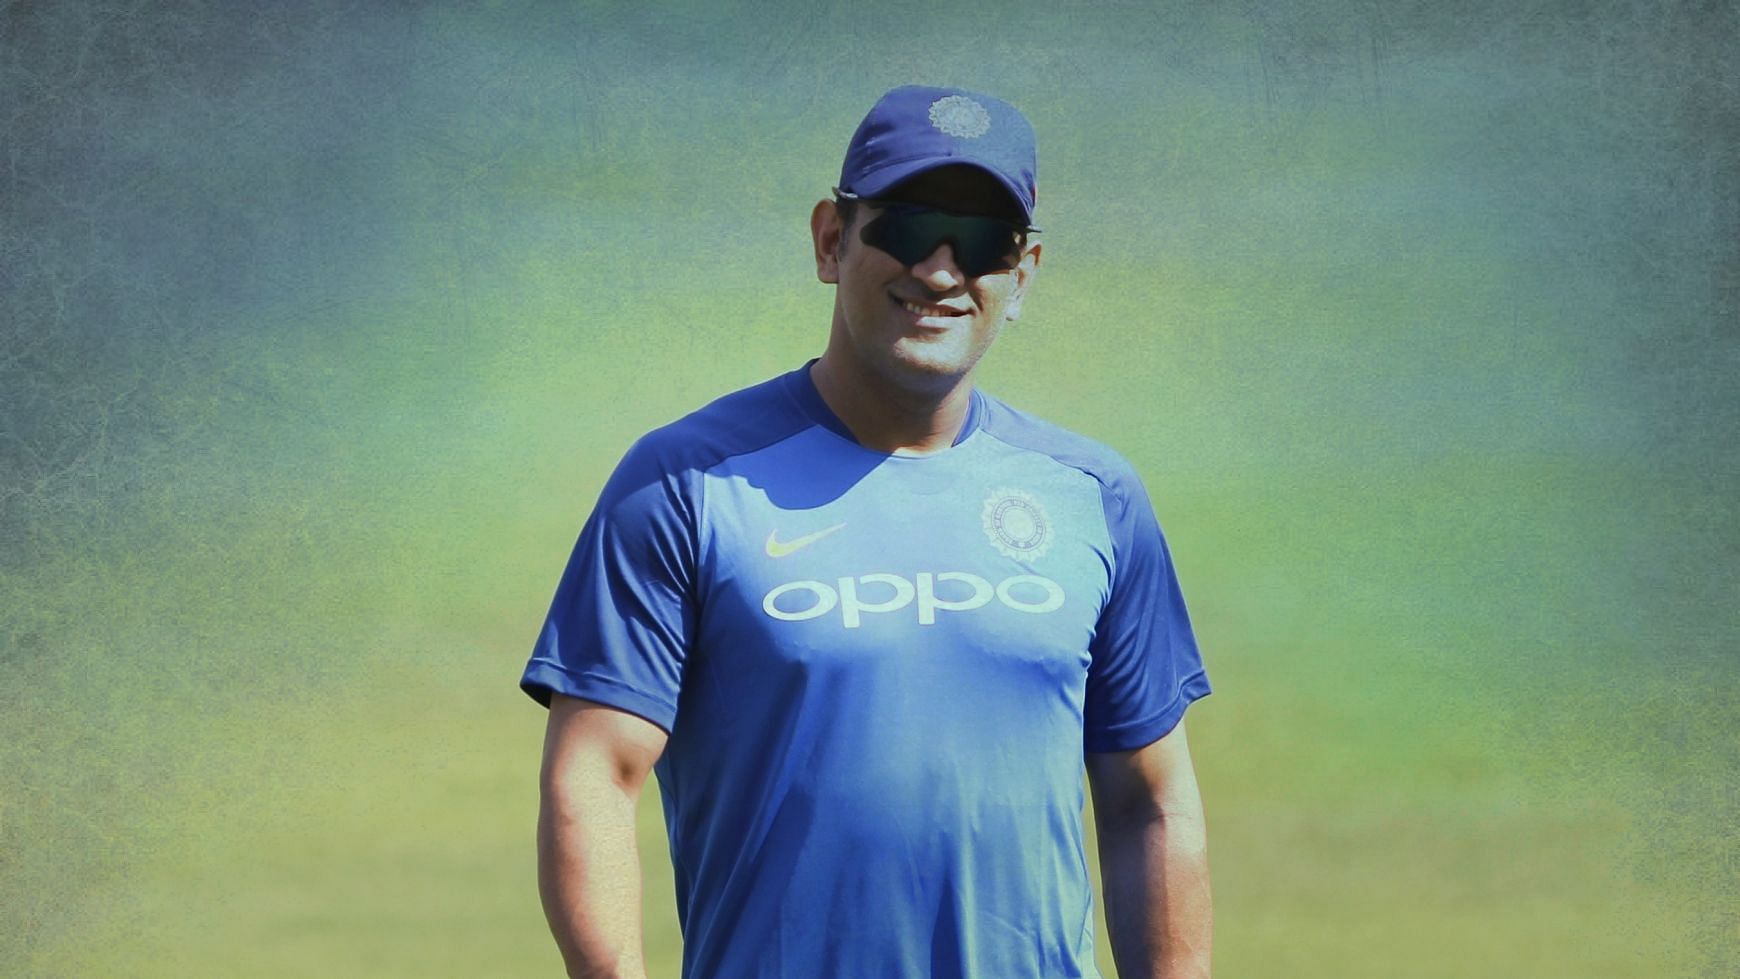 Tracing MS Dhoni’s career and how he became India’s most successful captain.